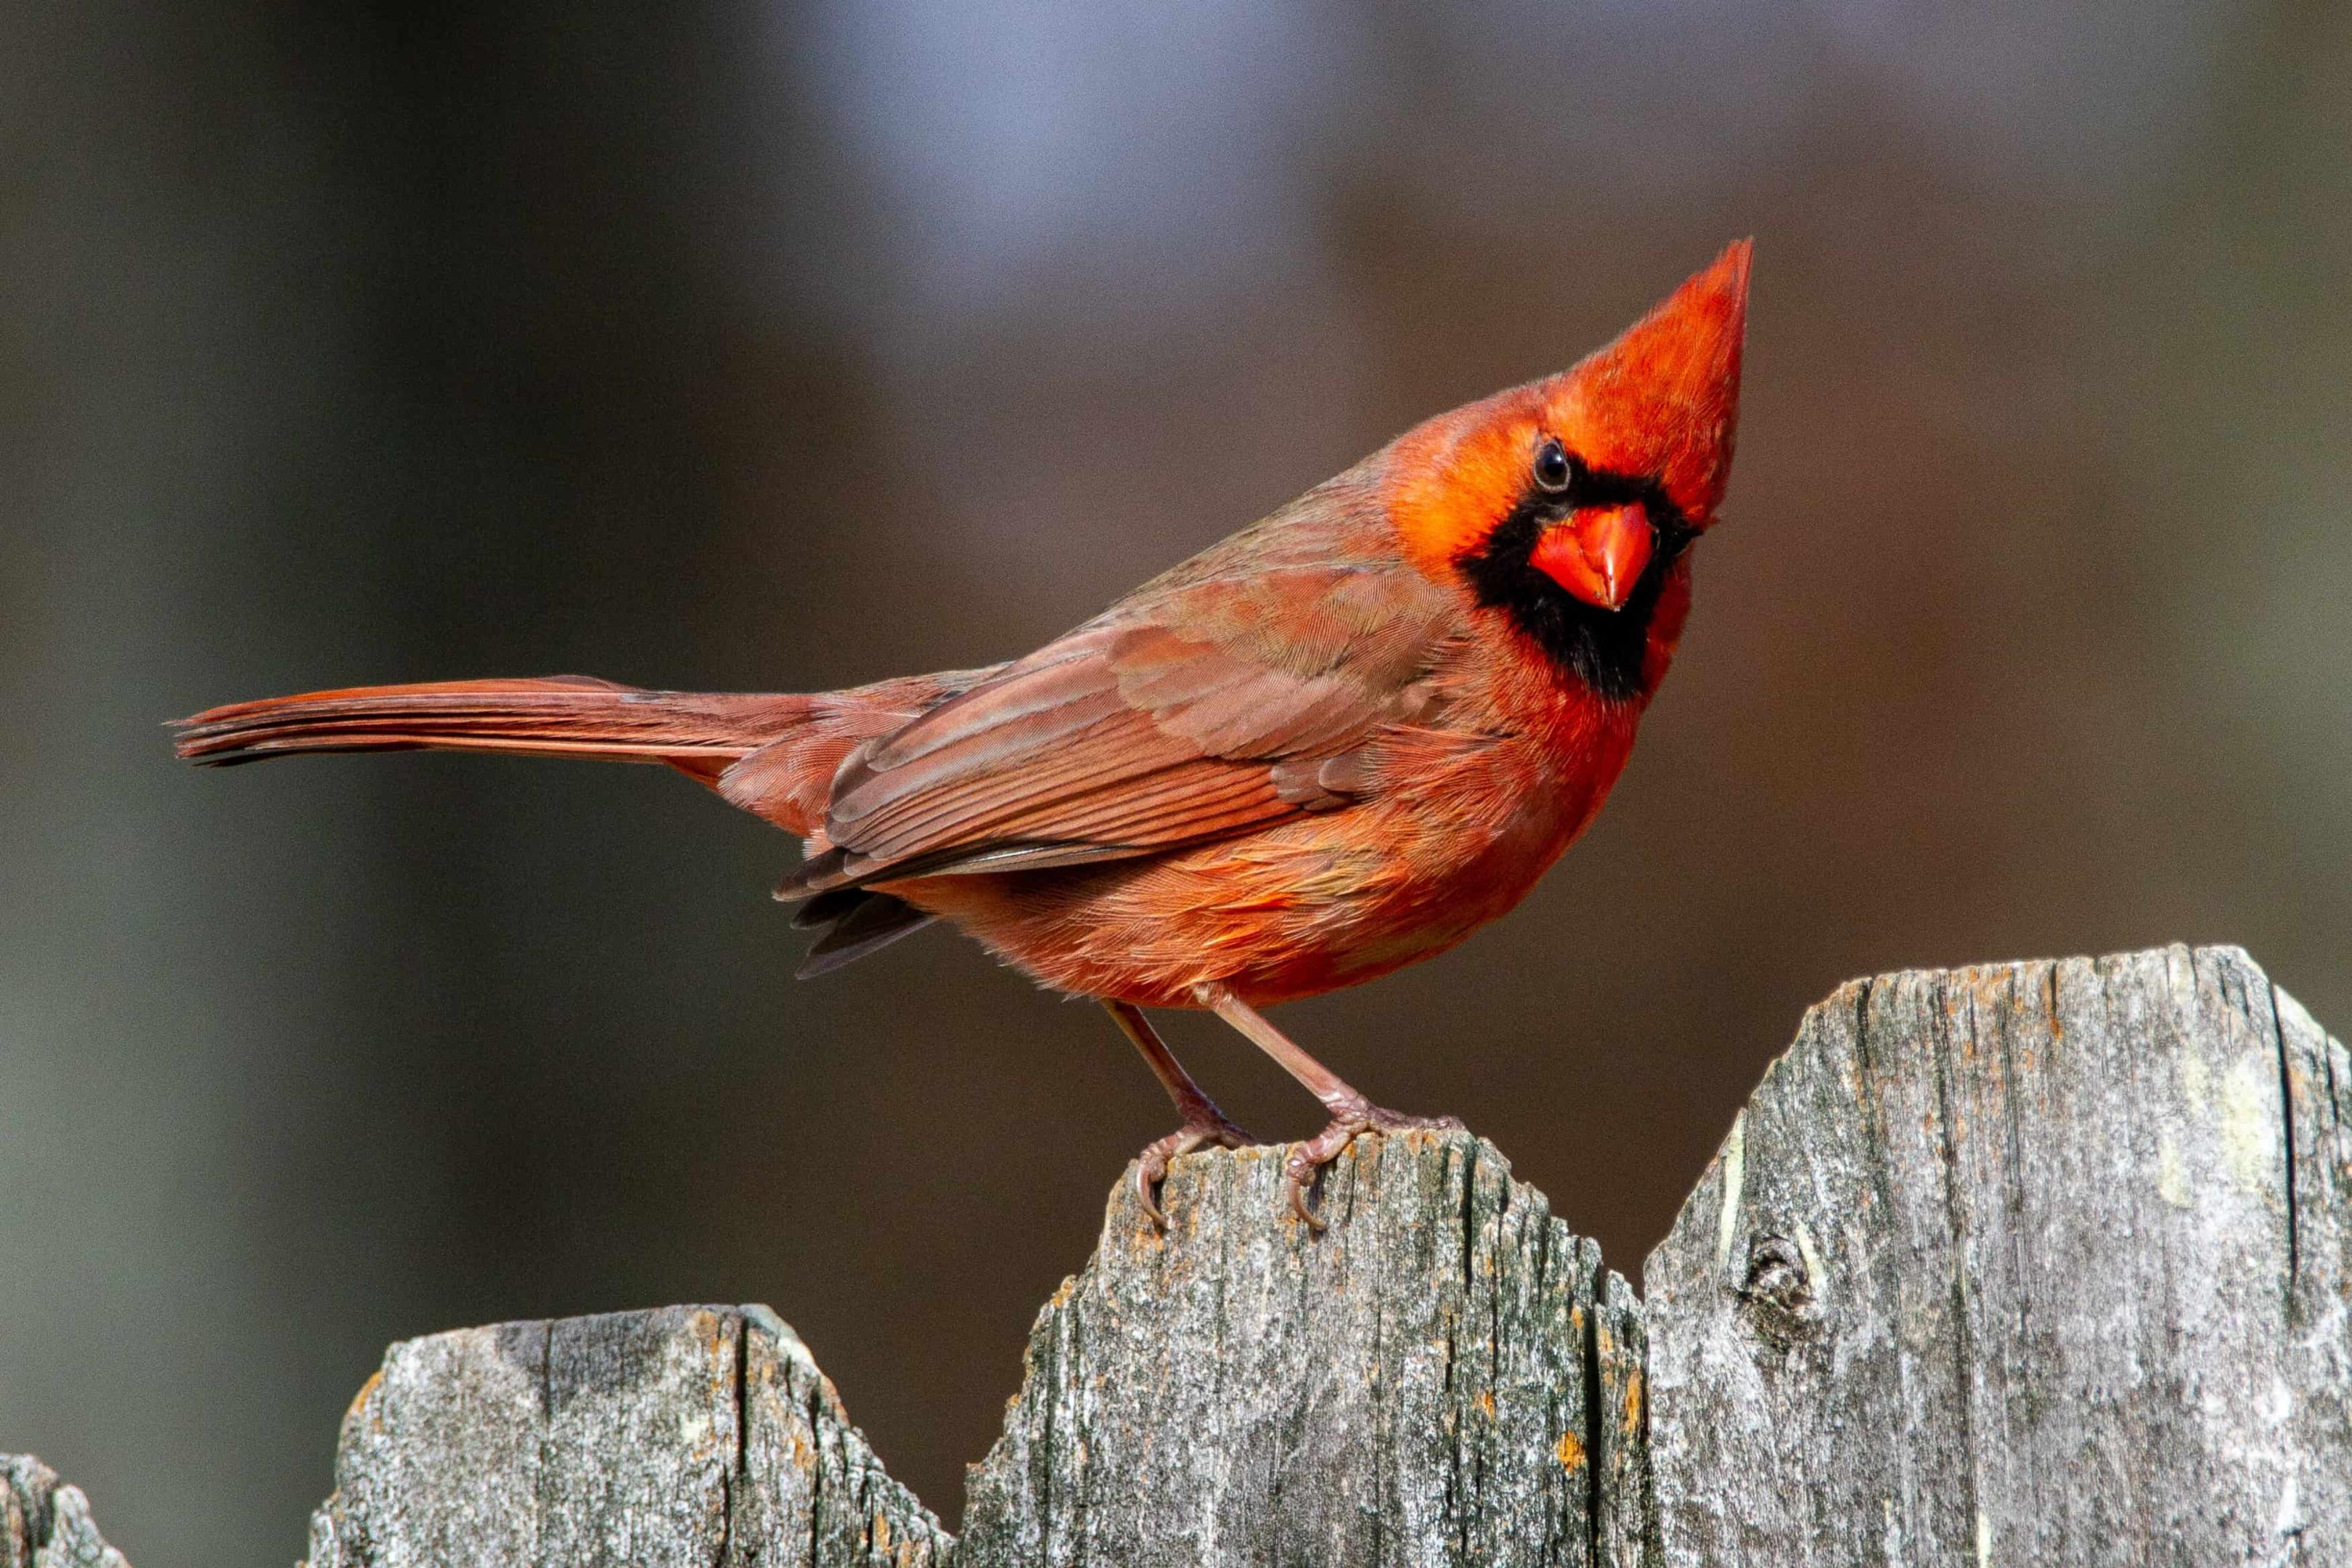 Connection Between Cardinals and Relationships